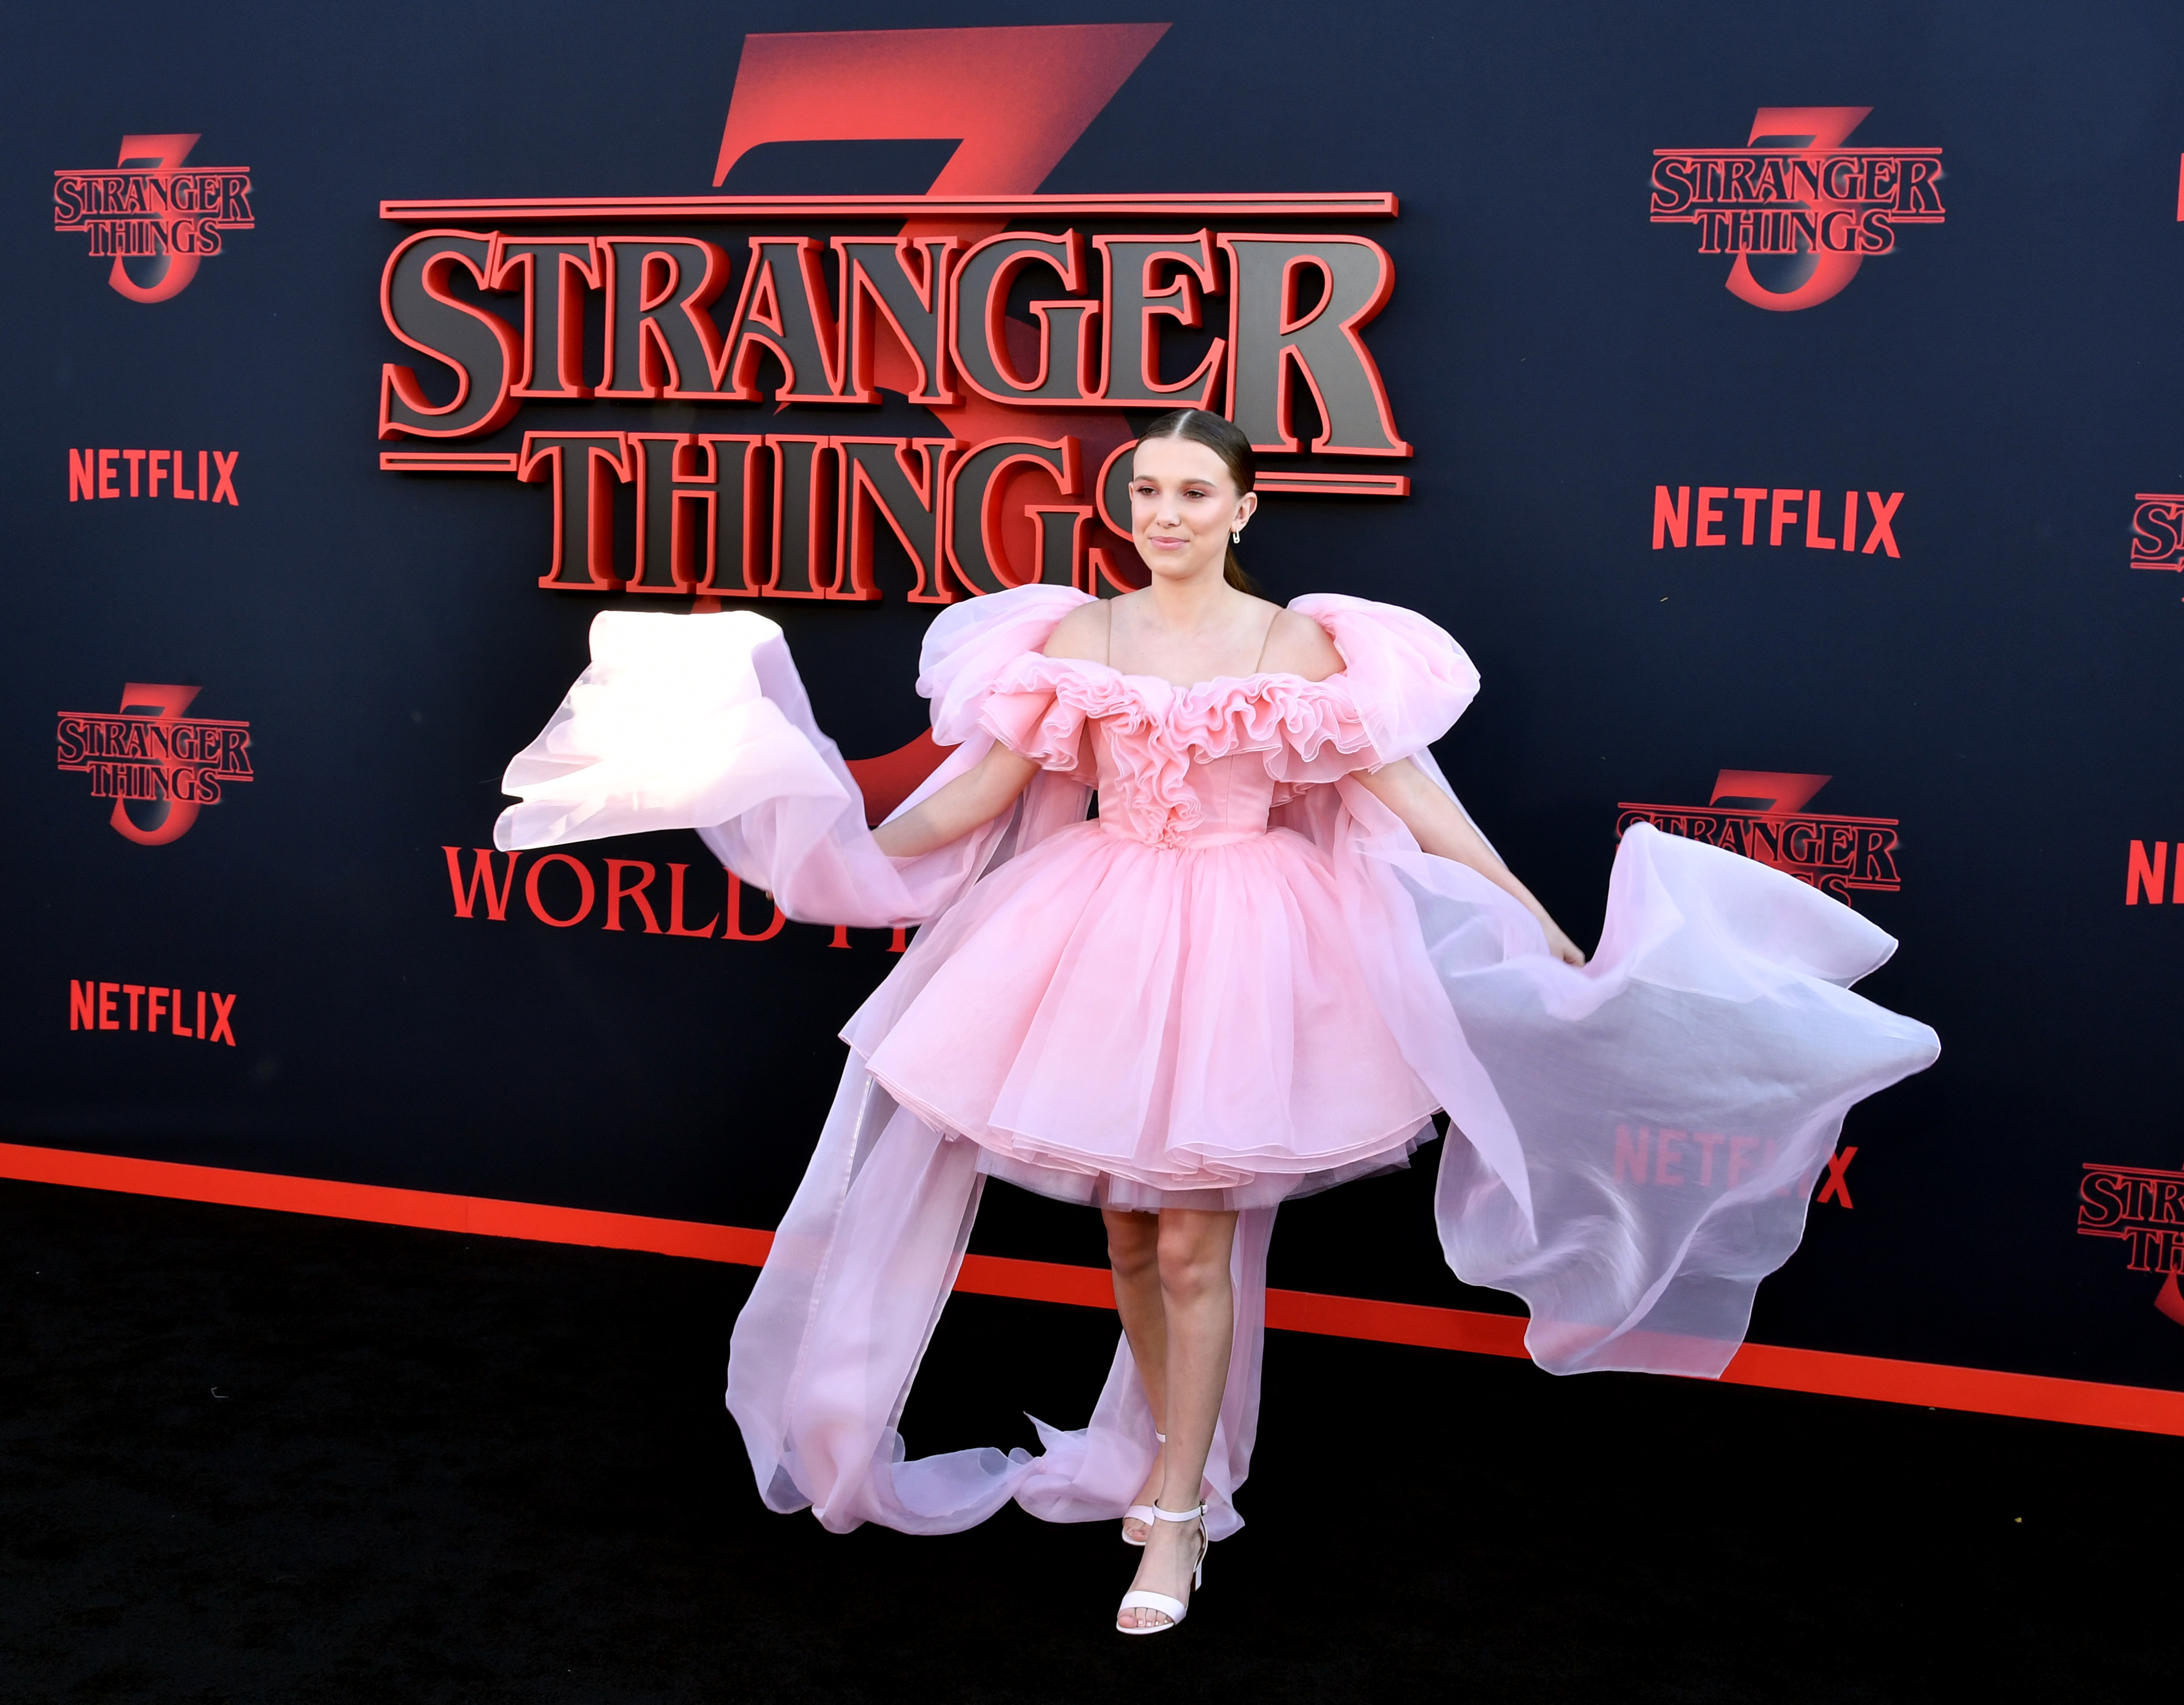 Millie Bobby Brown attends the premiere of Netflix's 'Stranger Things' Season 3 in Pink Dress